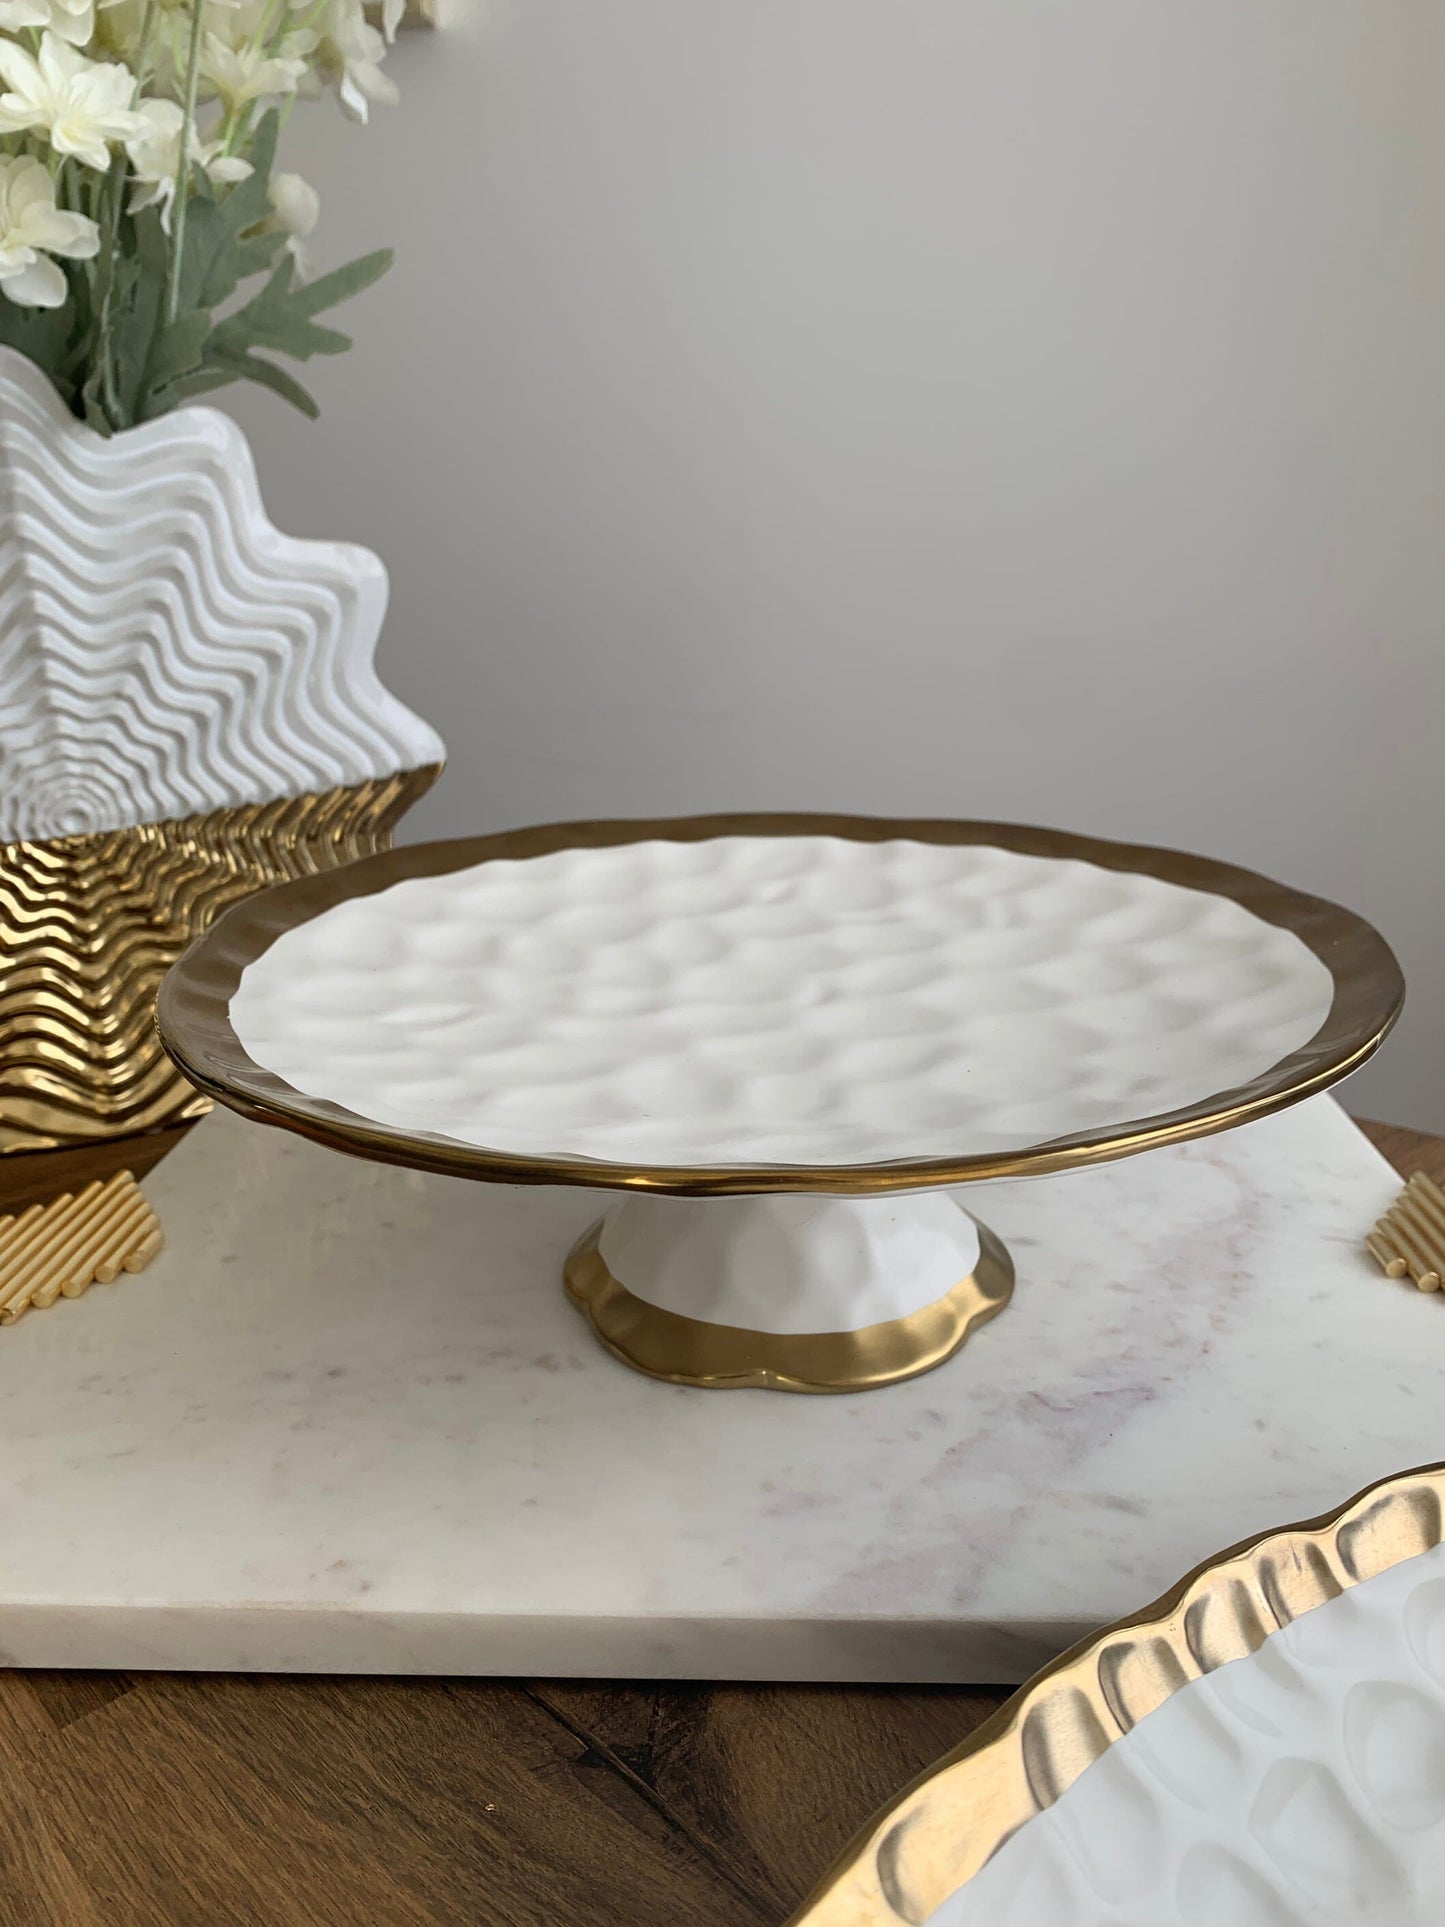 Porcelain White Cake Stand with Gold Border Cake Stands High Class Touch - Home Decor 